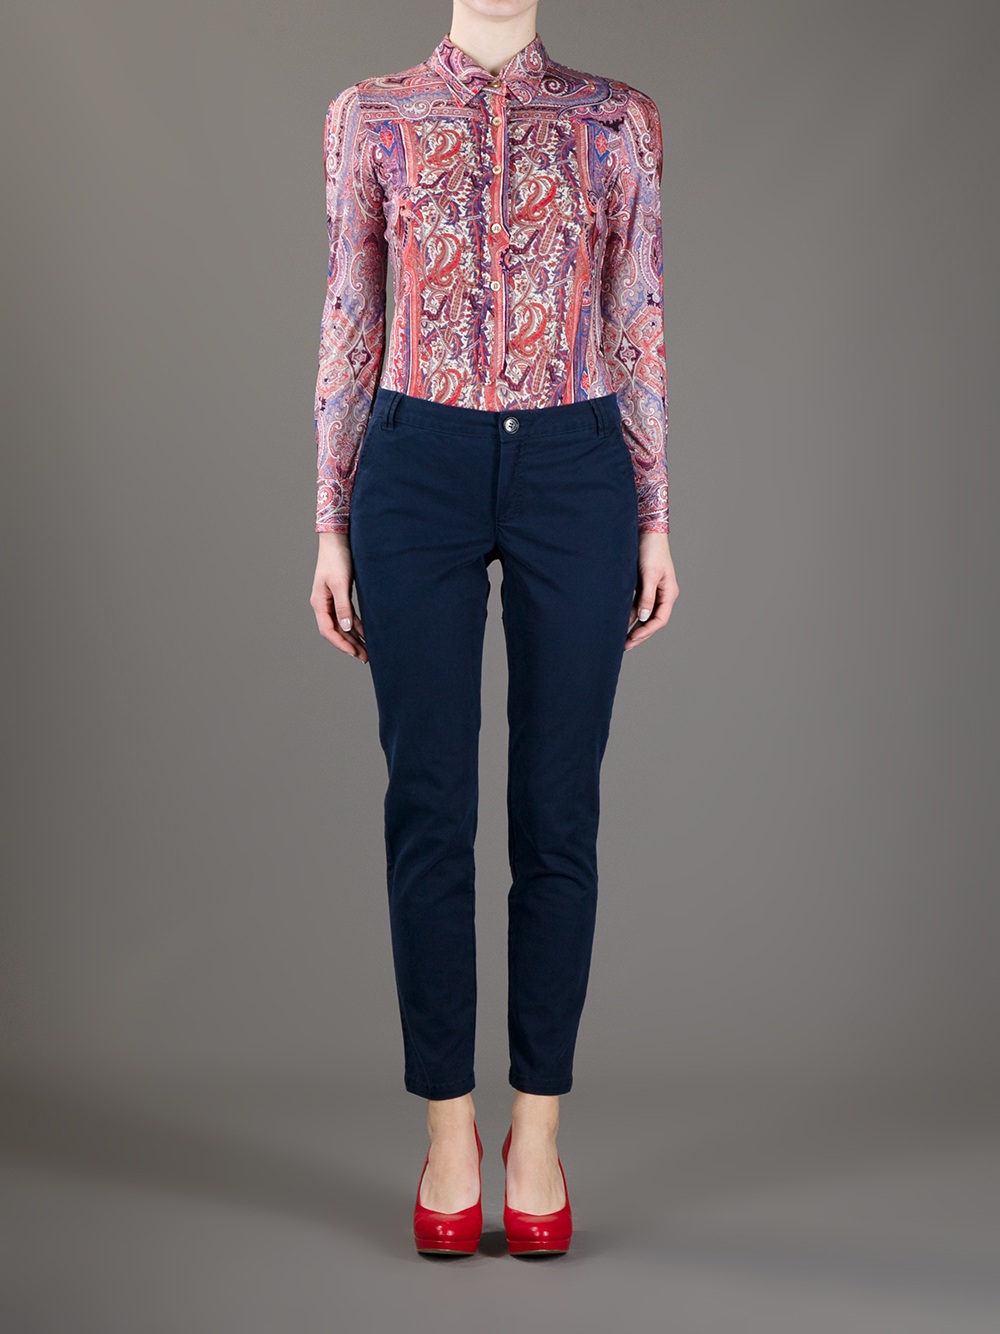 Isabel Marant Paisley Print Shirt in Red - Lyst